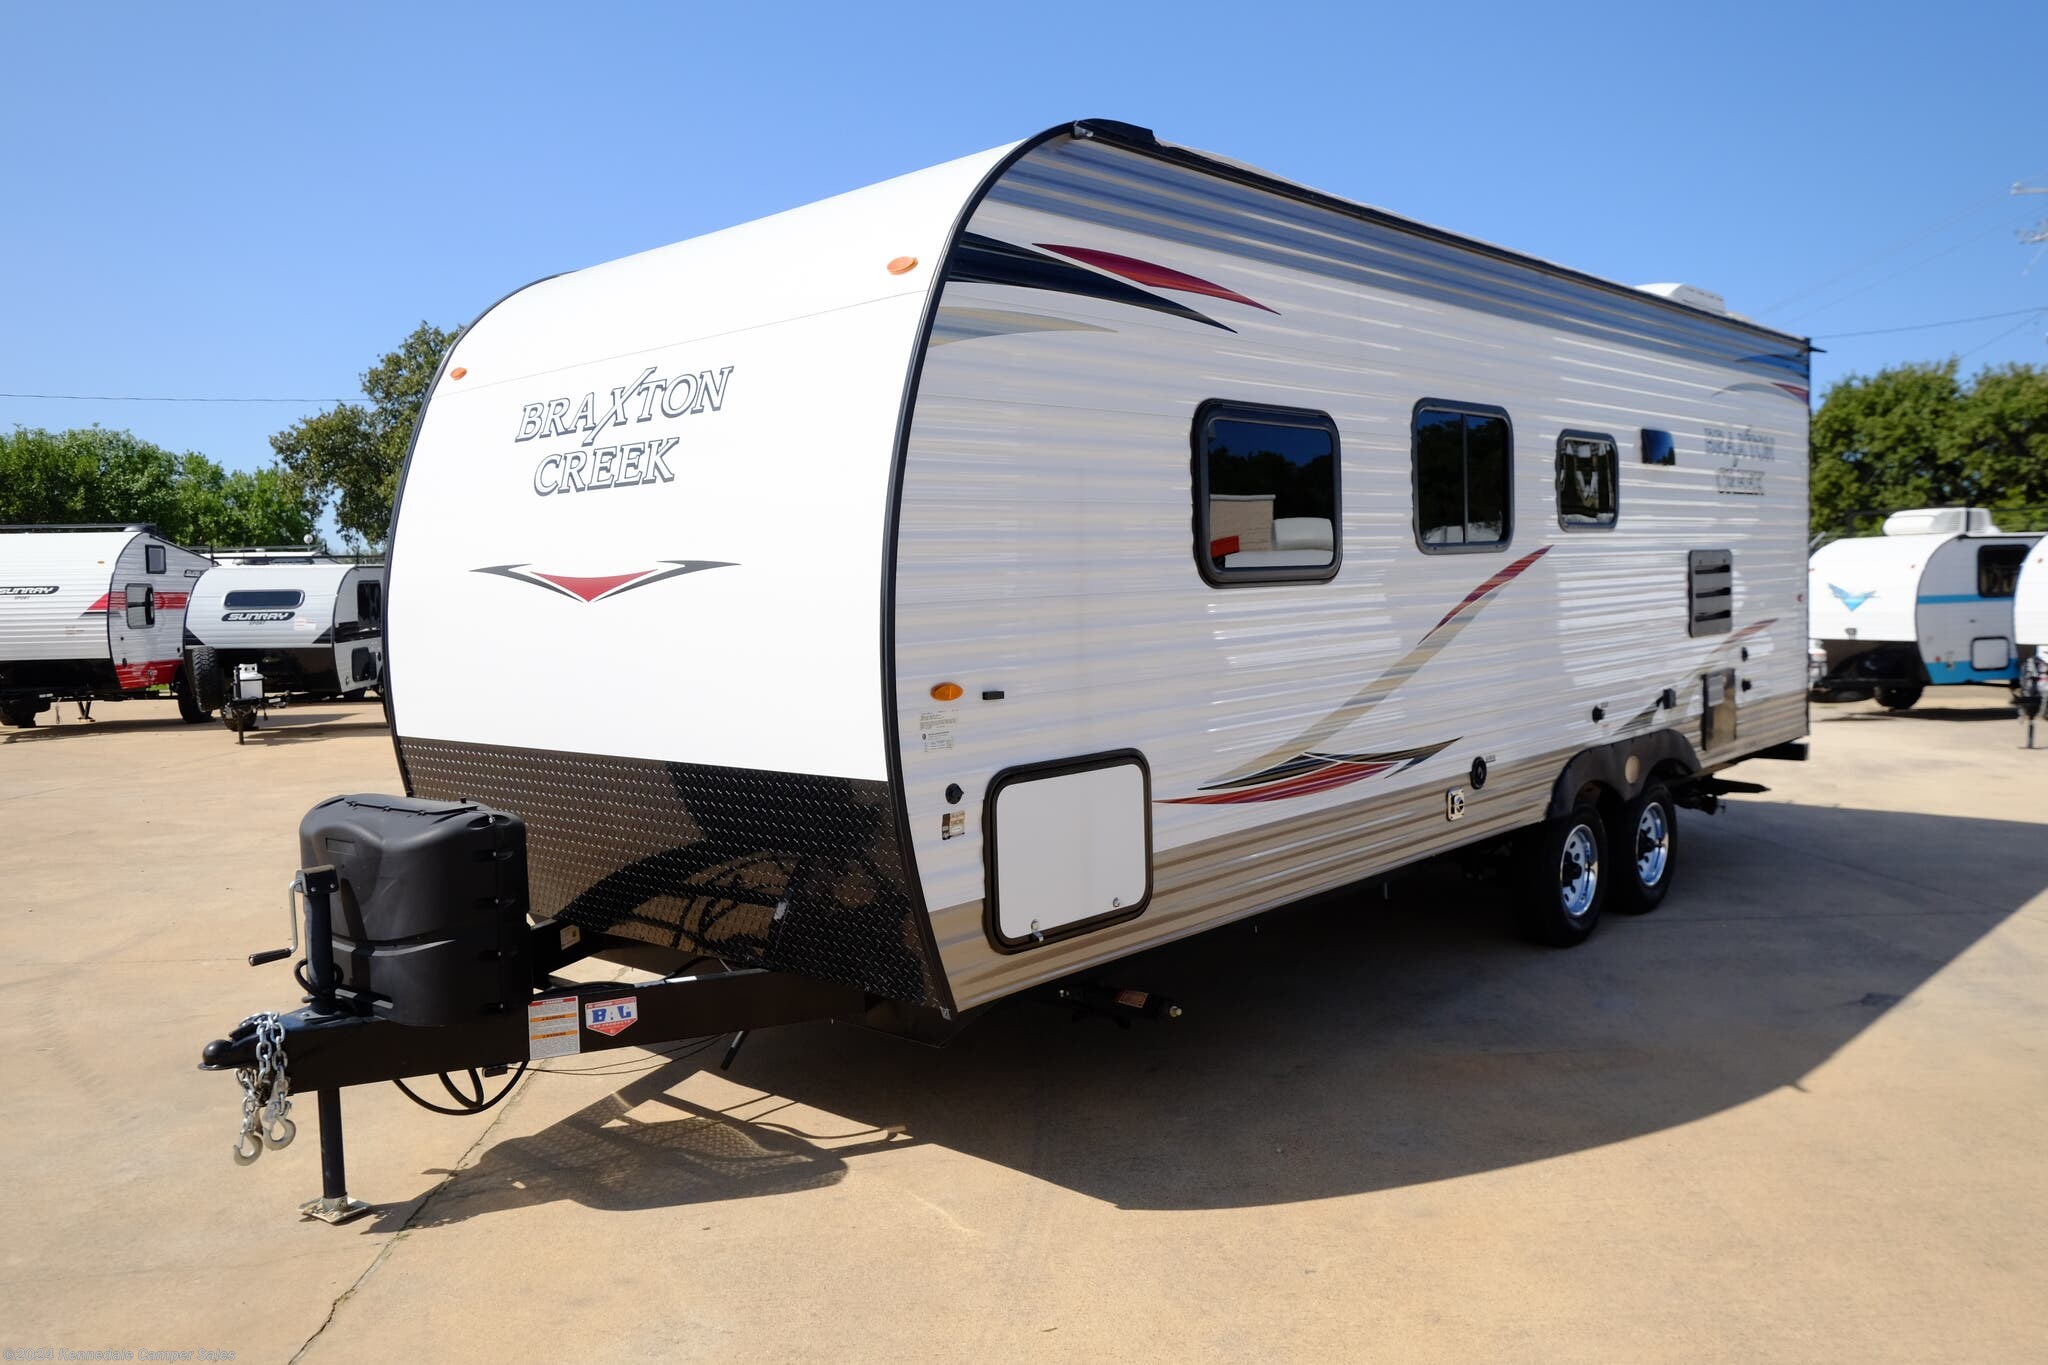 2020 Braxton Creek BX 24RB RV for Sale in Kennedale, TX 76060 | 7E0060 ...